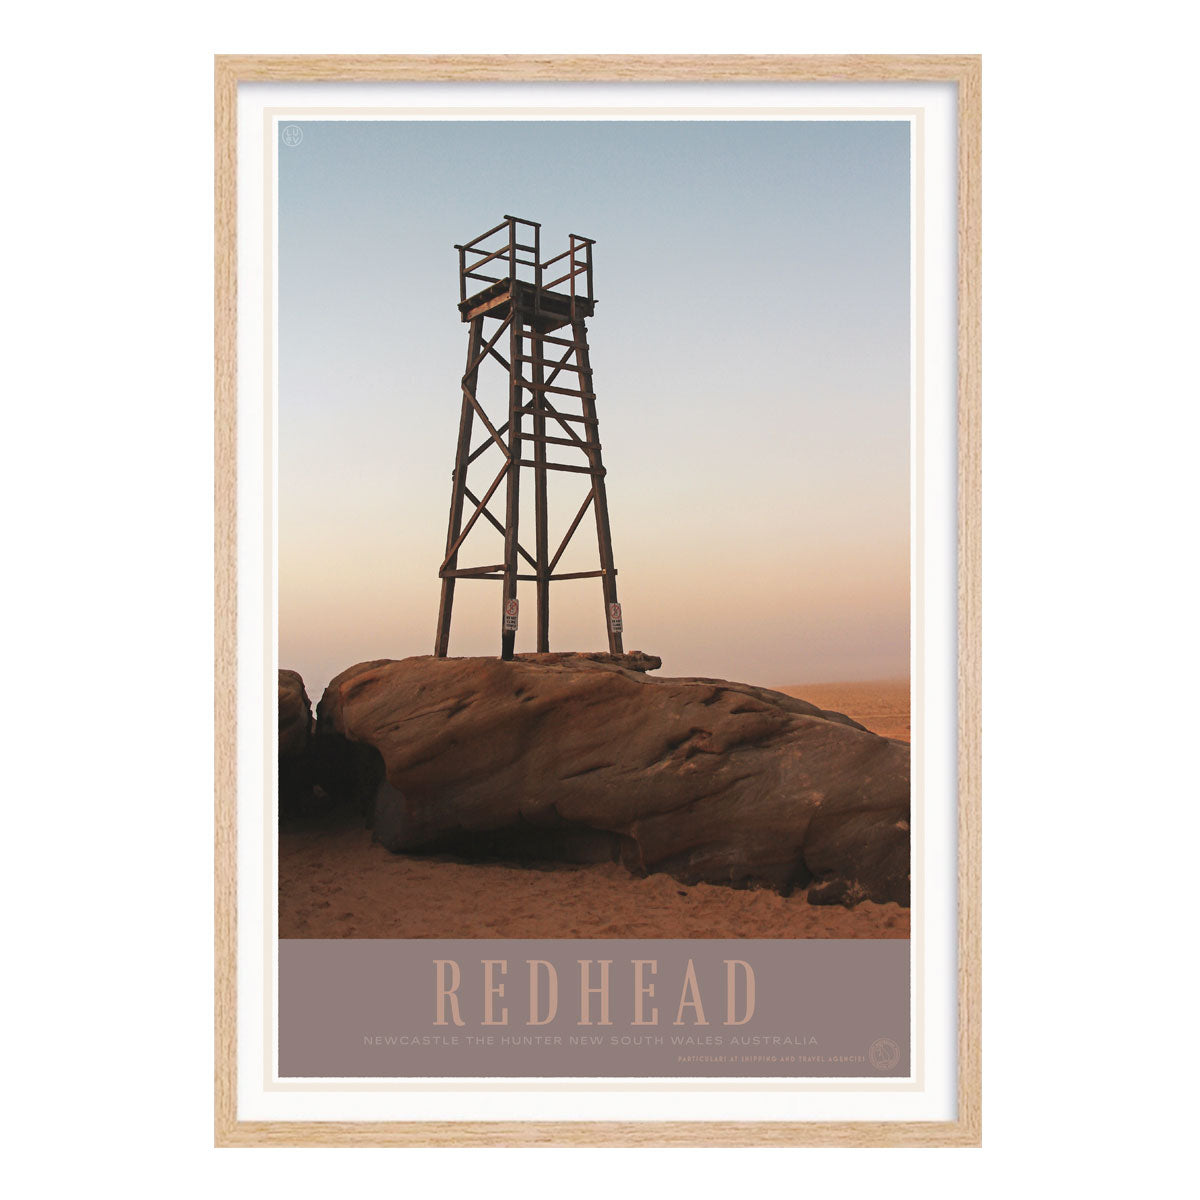 Newcastle redhead beach vintage retro poster print in oak frame from places we luv